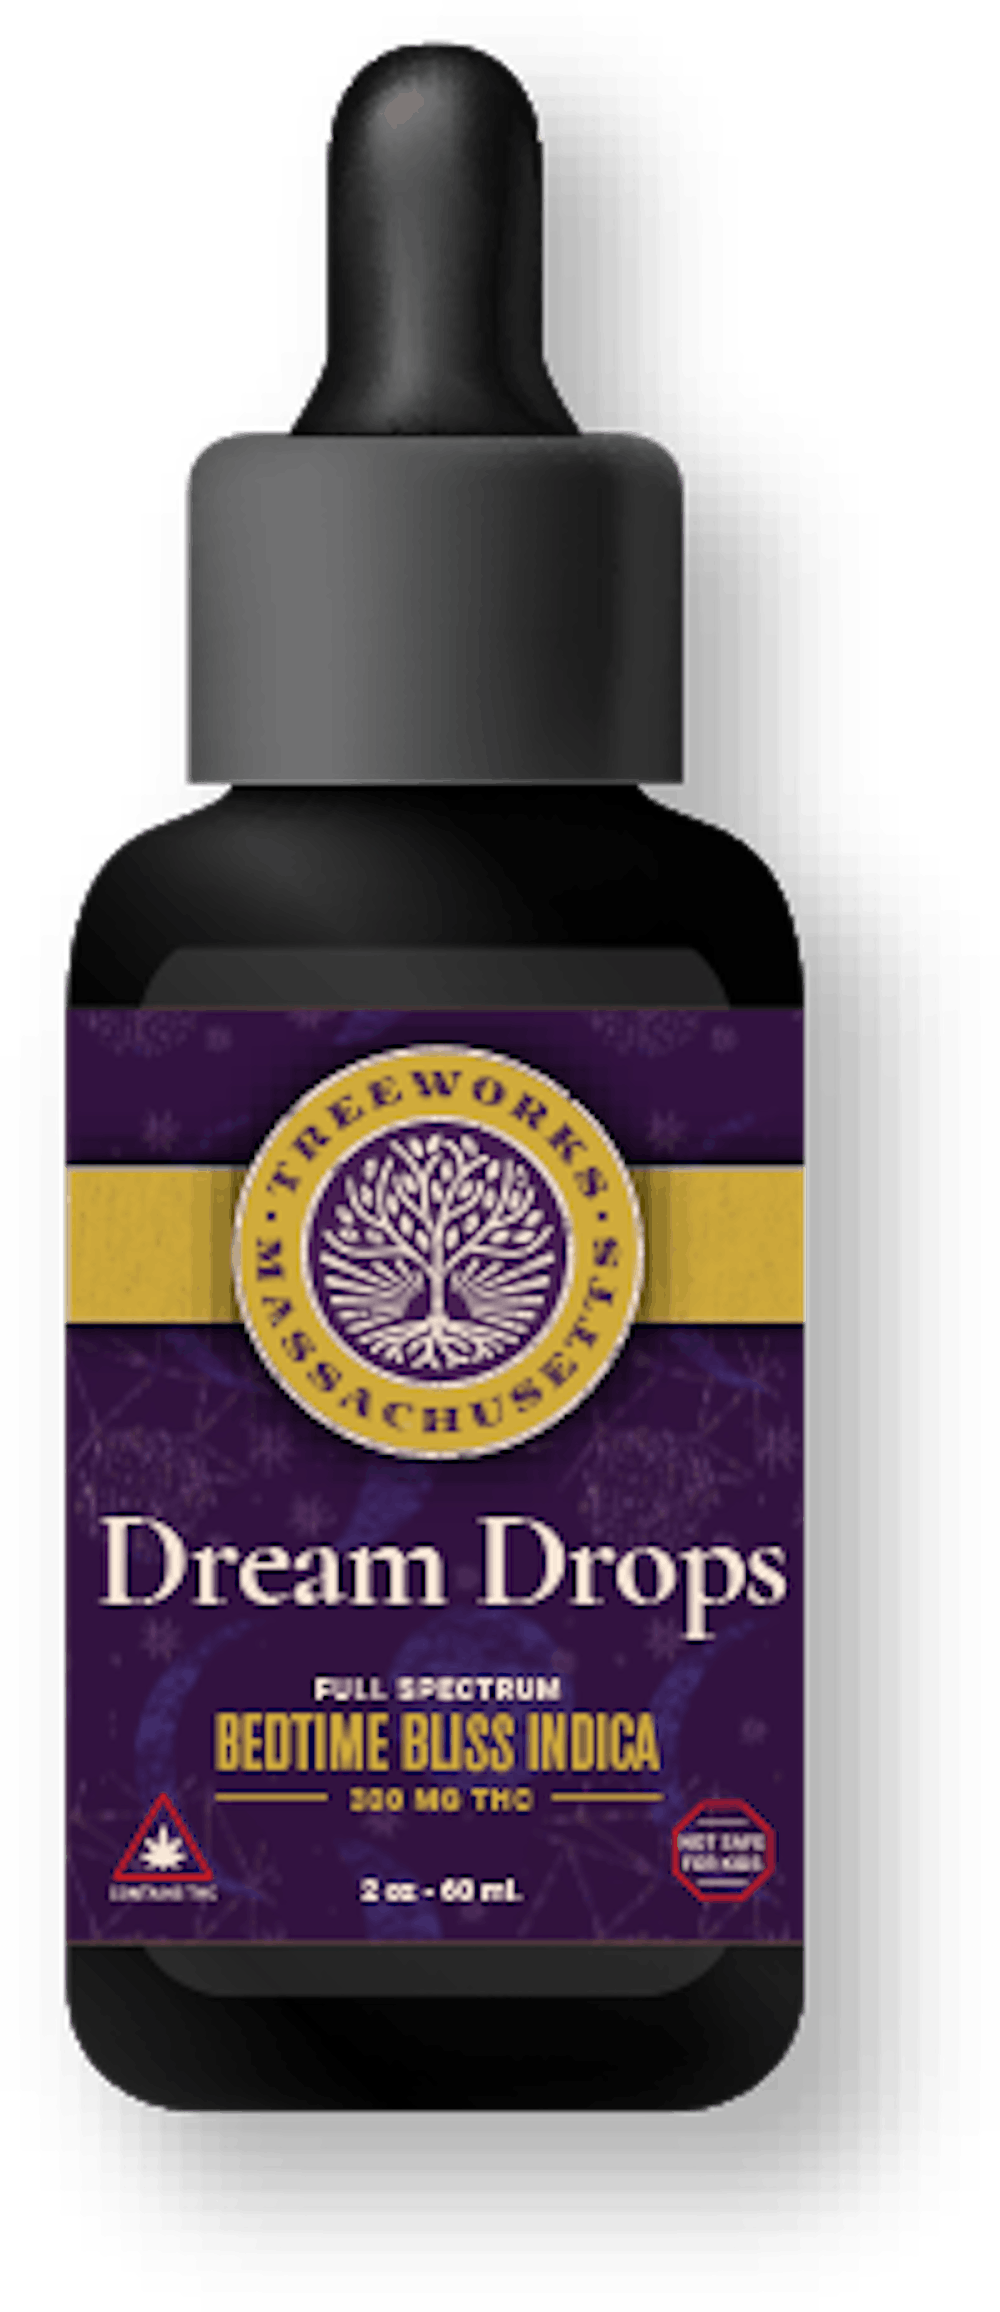 Product Dream Drops | Bedtime Bliss